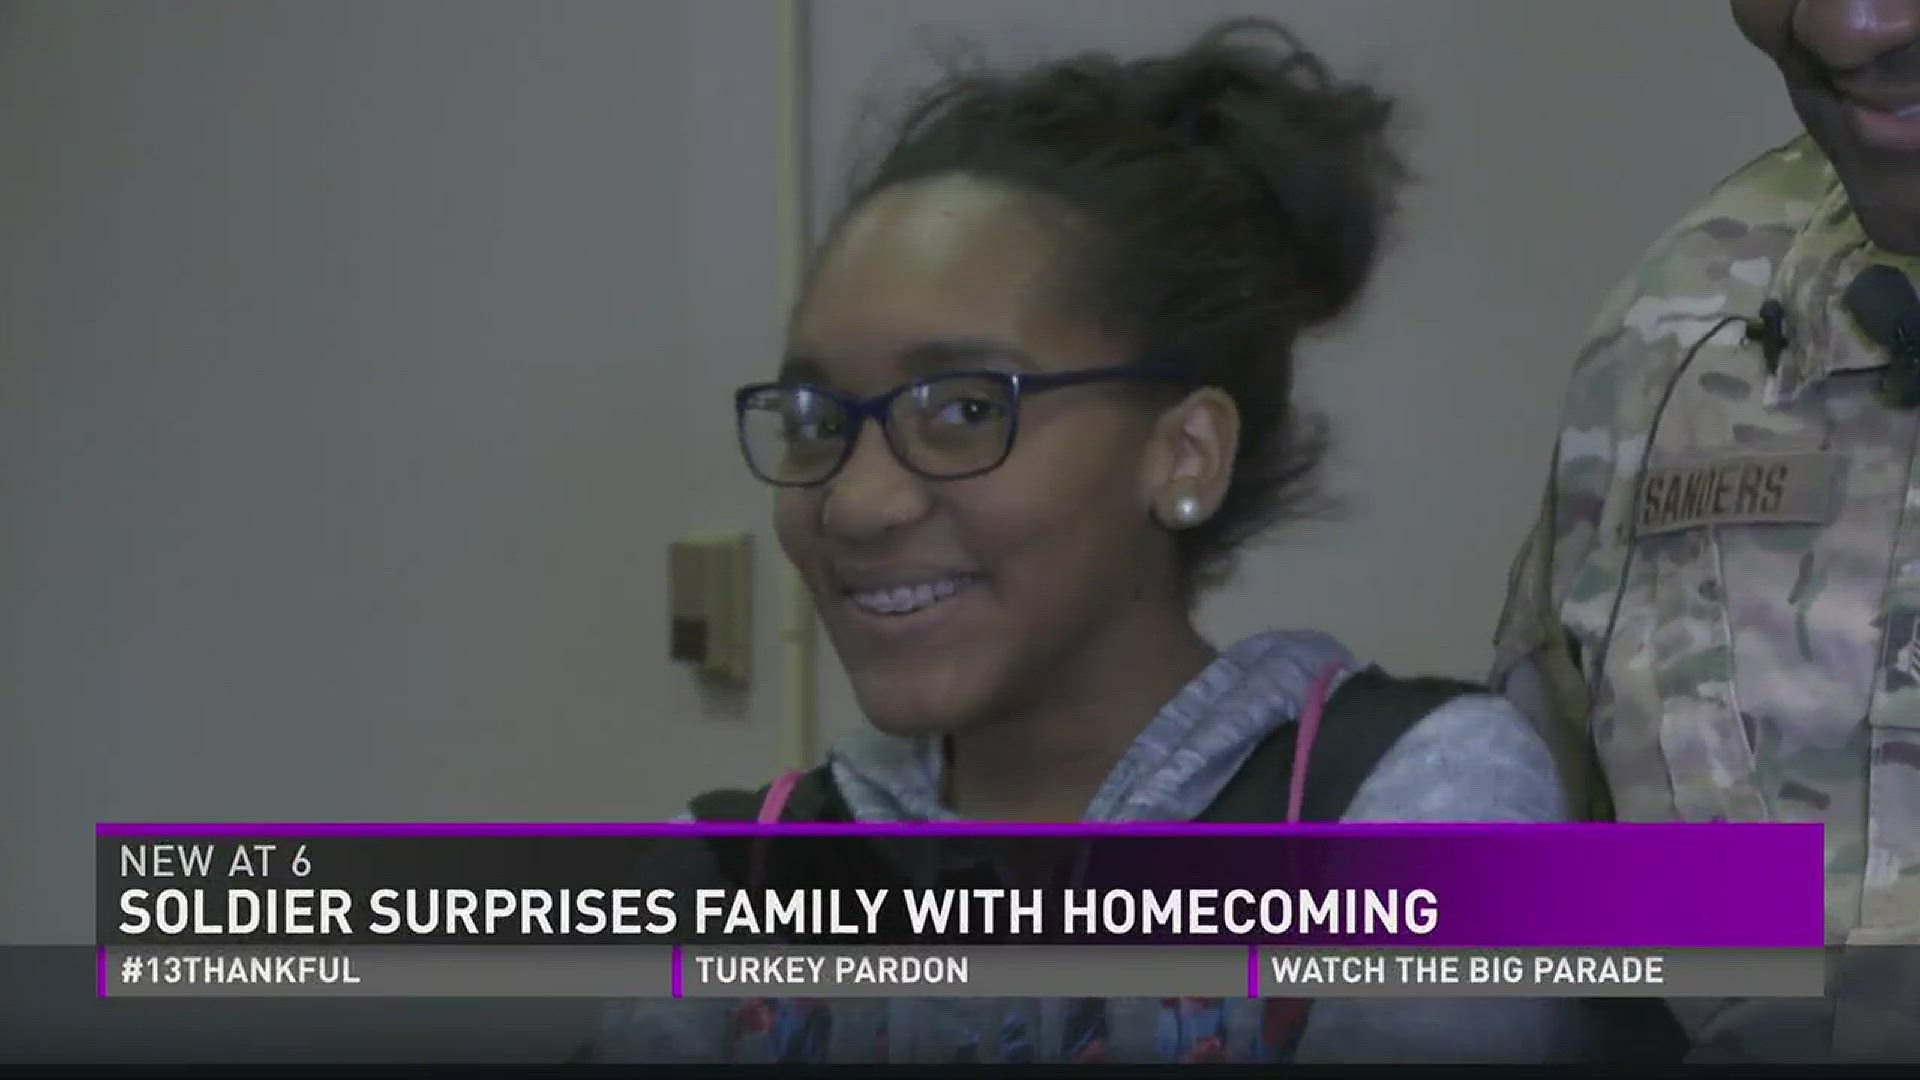 Soldier surprises family with homecoming